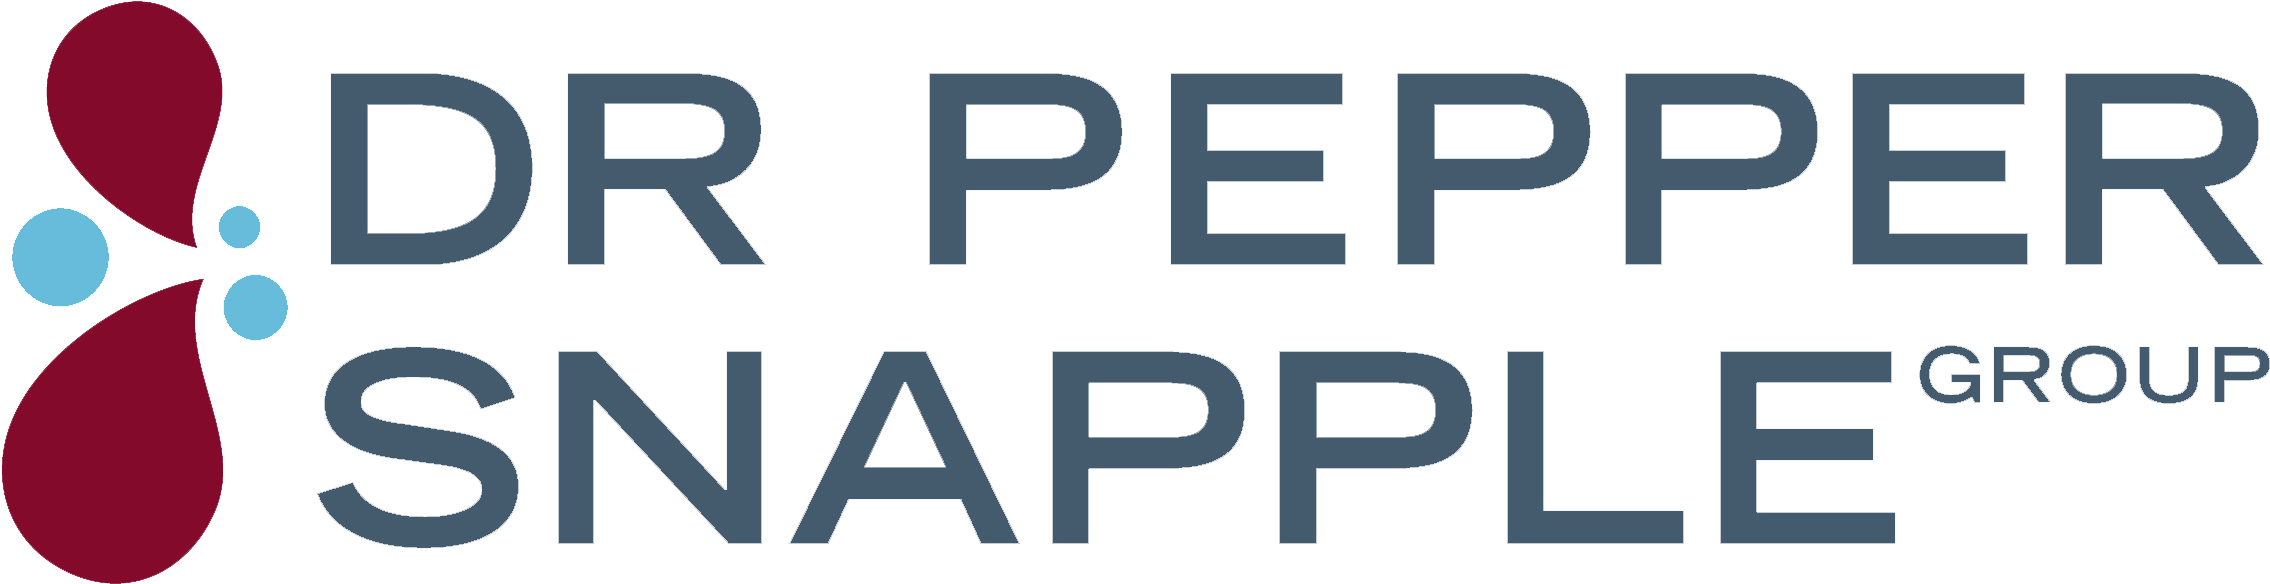 Pepper Snapple Group - Dr Pepper Snapple Group Logo Hd (2750x875), Png Download